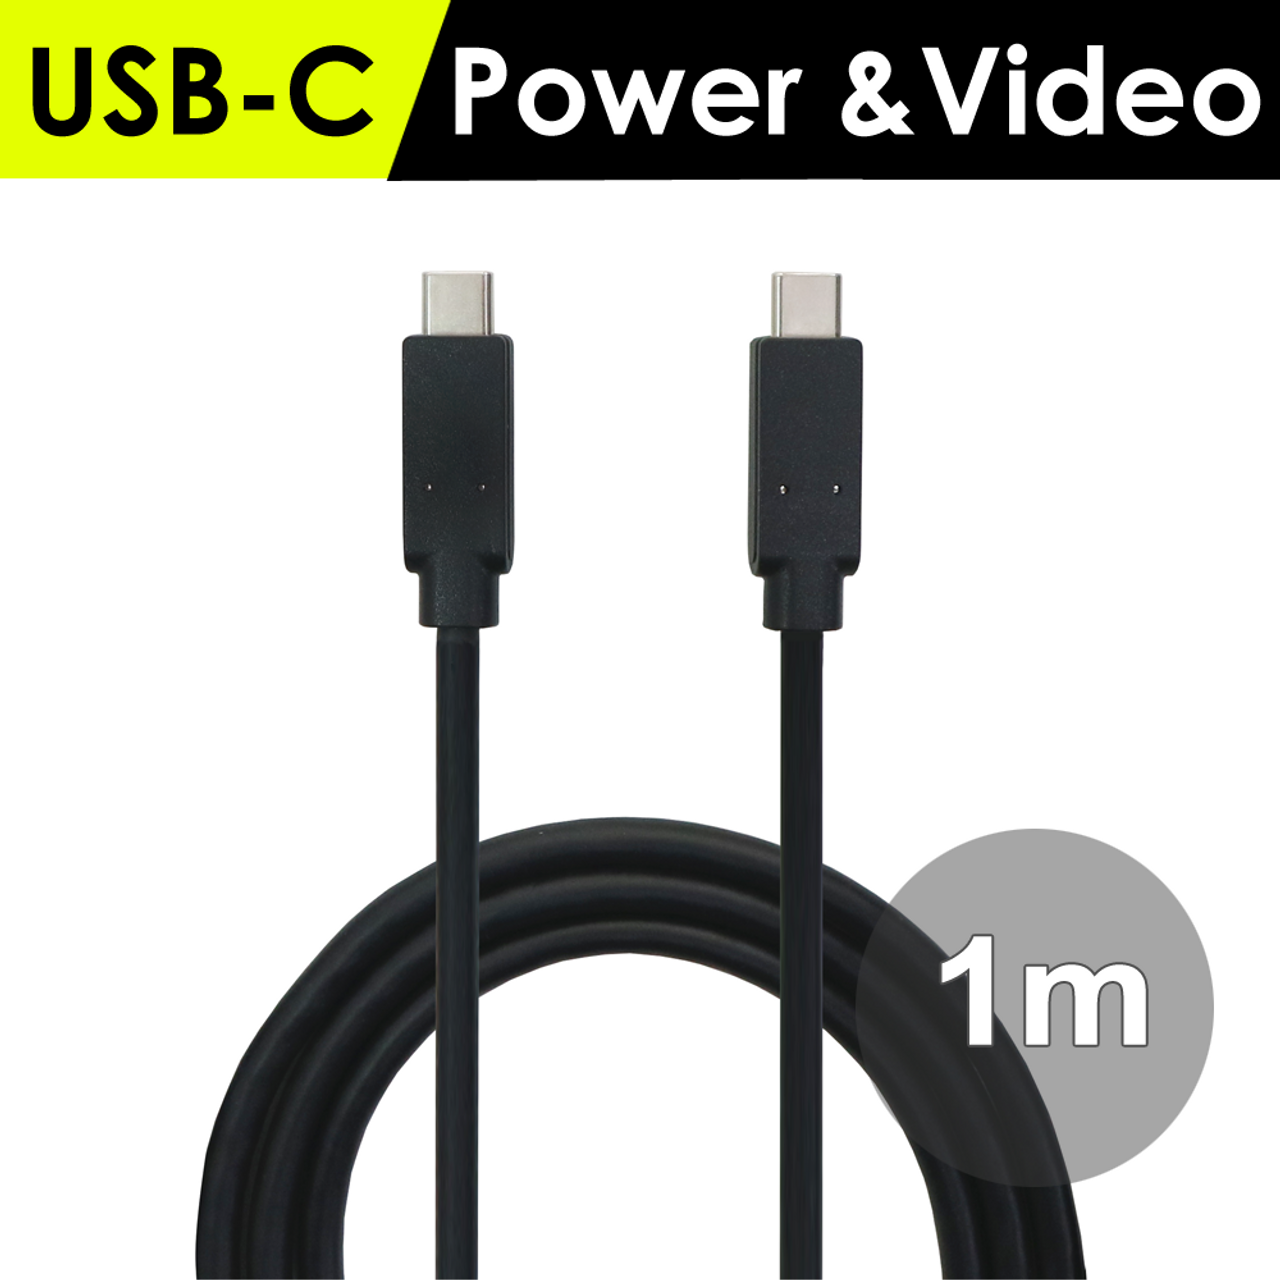 for USB-C Phone 0.5m GeChic 1306 Monitor USB Type-C Video and Independent Power Y-Cable 